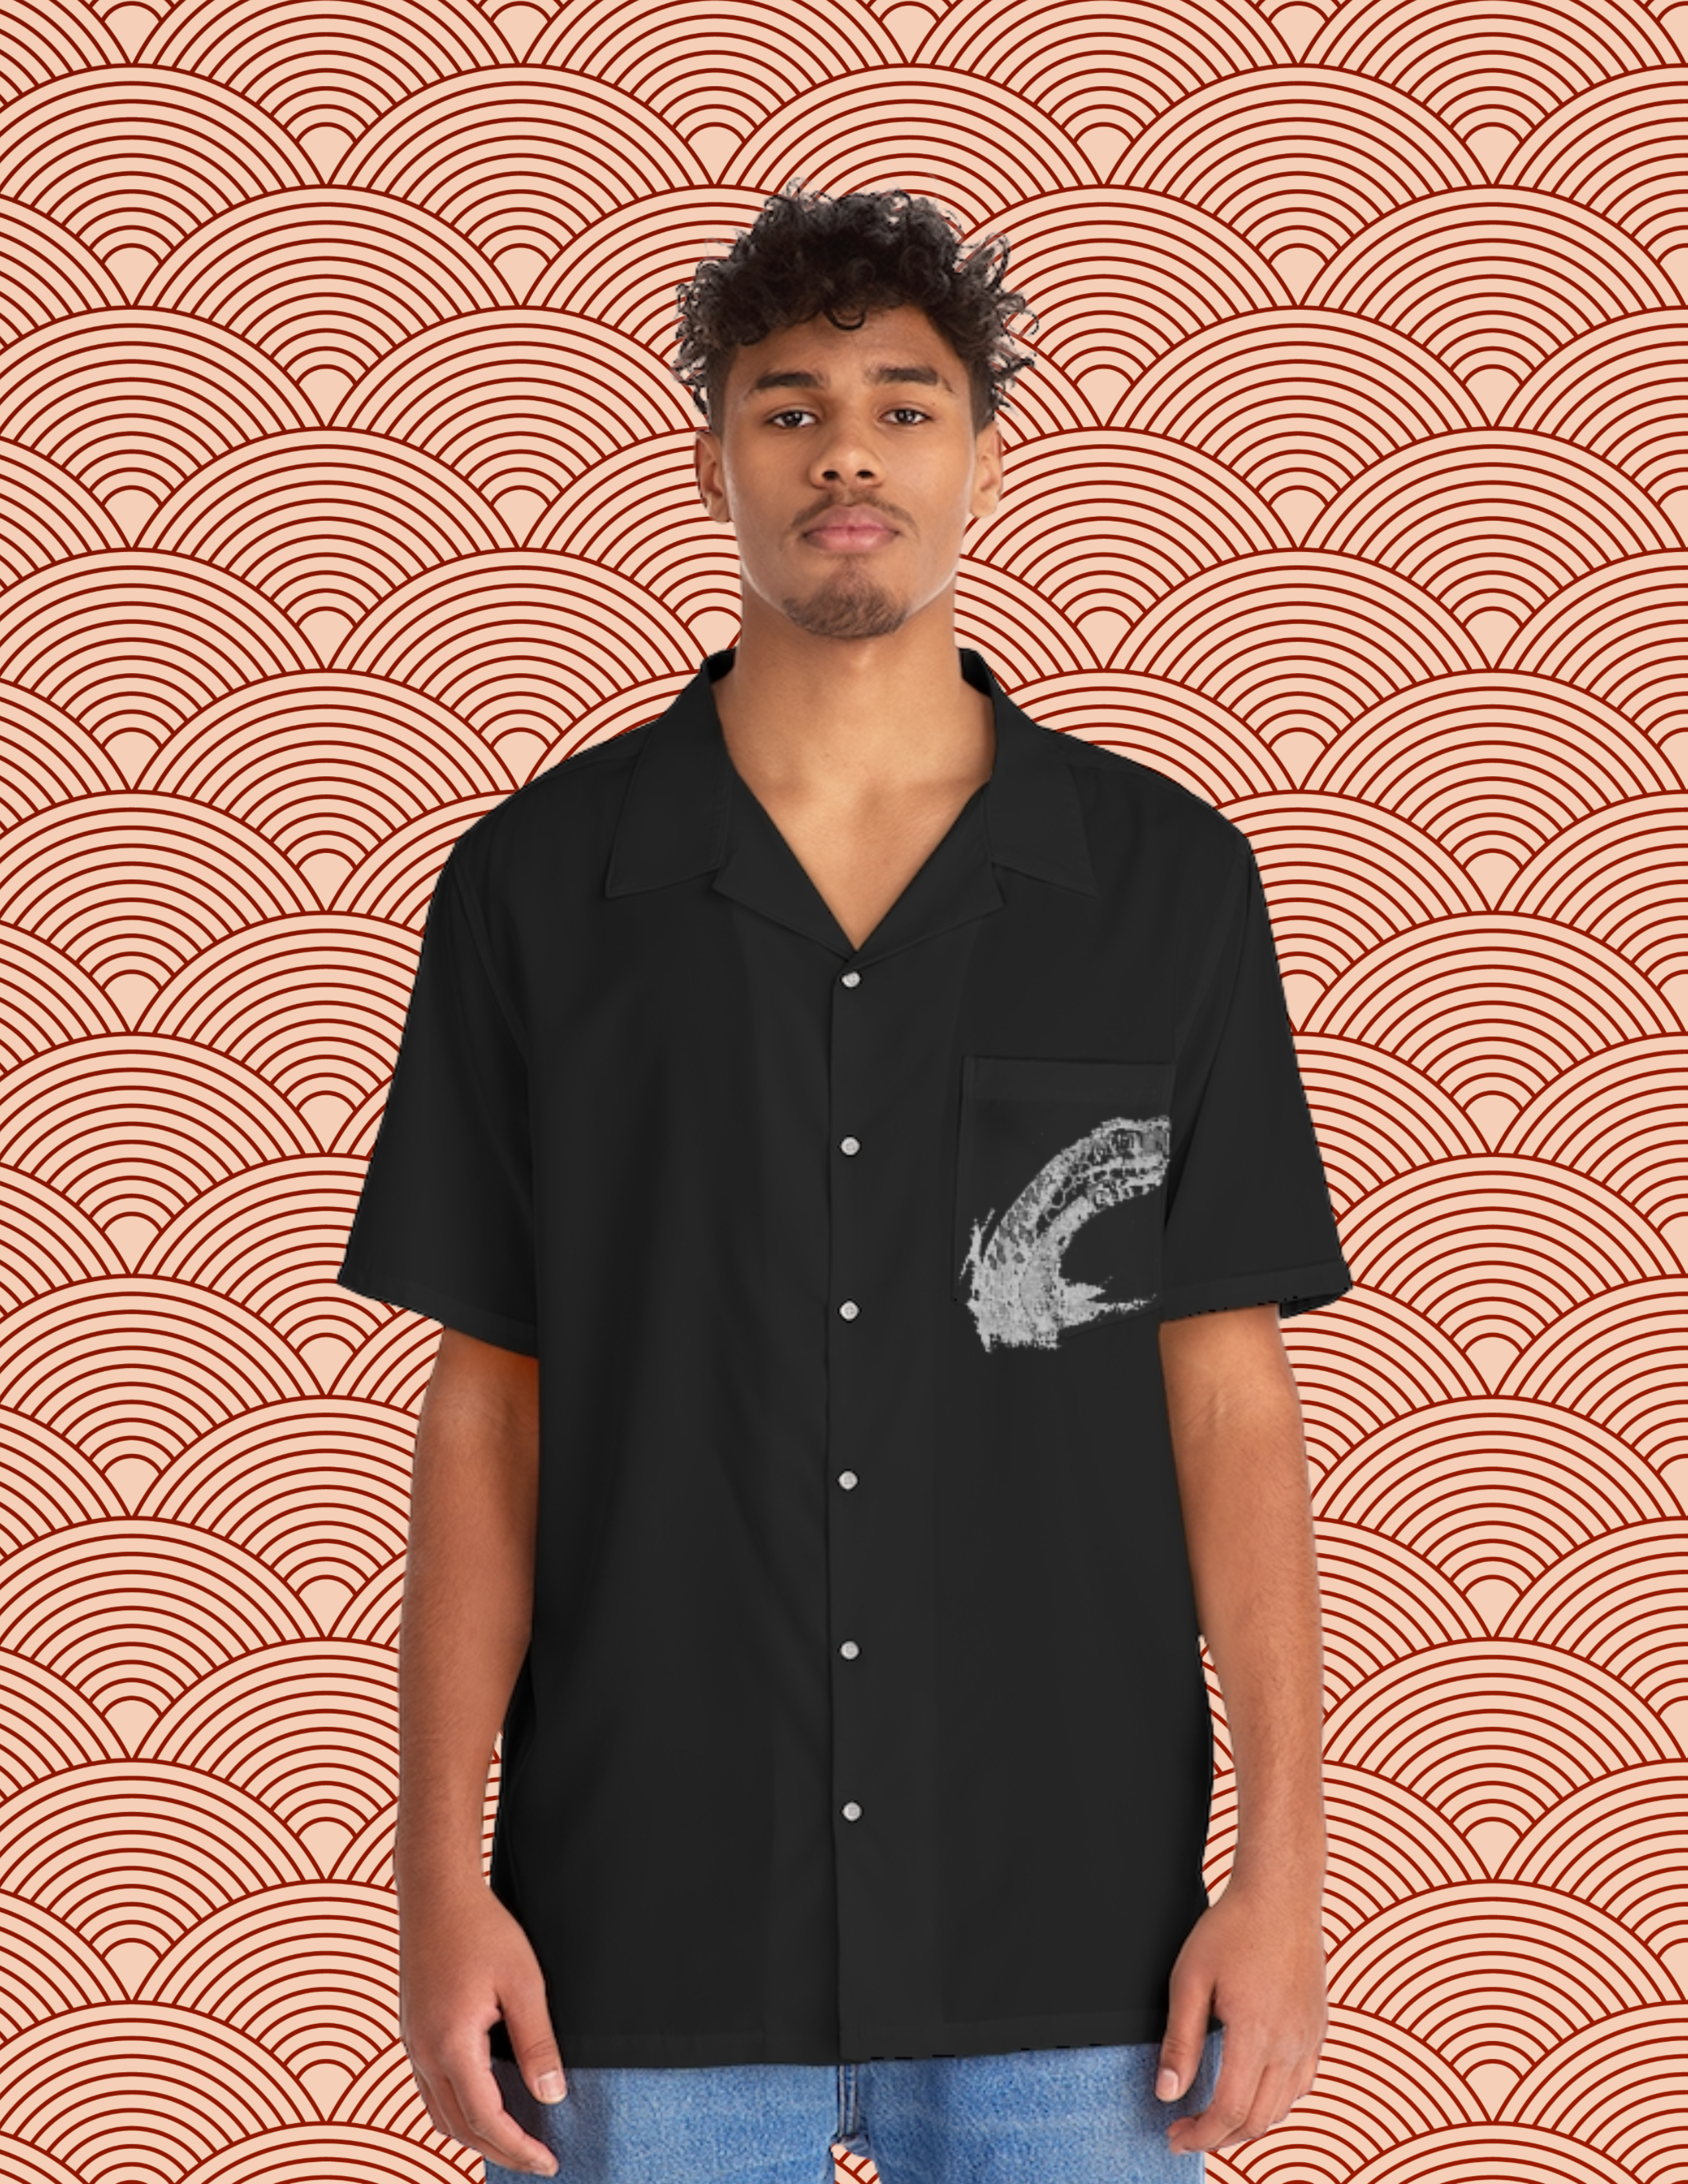 A man wearing a limited edition black Oron's Collection LTE - Dangerous Snake T-Shirt featuring an image of a crocodile.